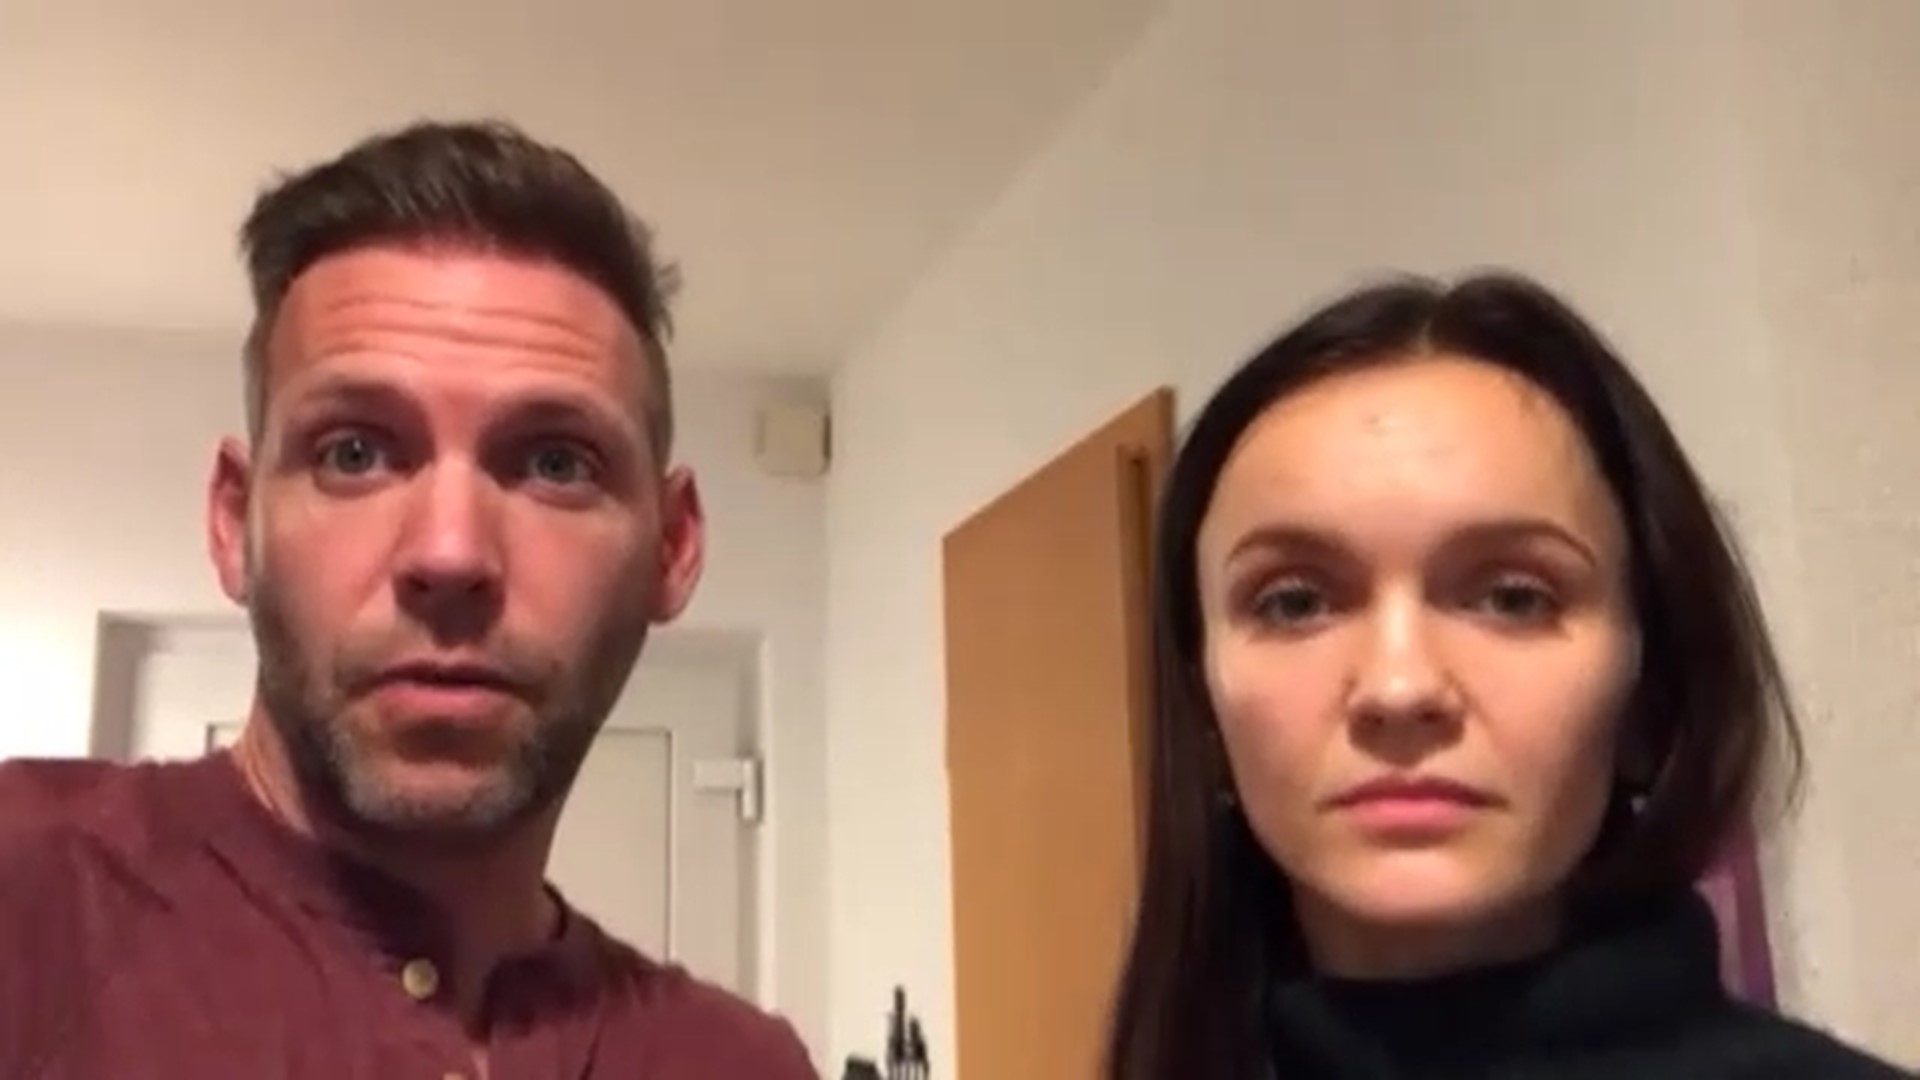 Ryan Baird walked more than 27 hours to make it out of Ukraine. His wife, Anastasia, eventually also made it to Poland before the couple reunited in Germany.